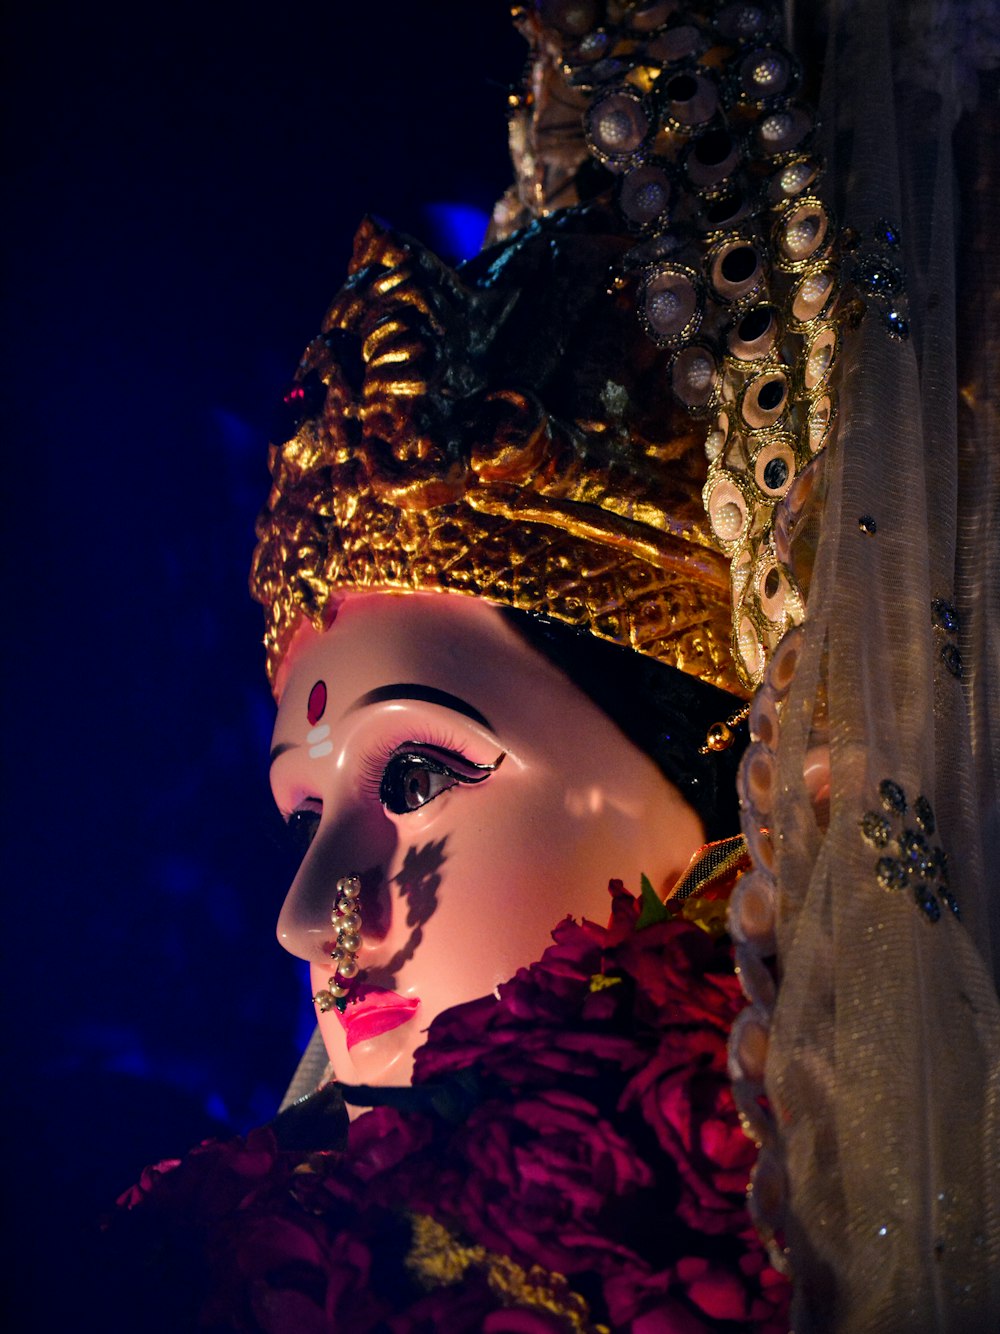 a close up of a person wearing a mask